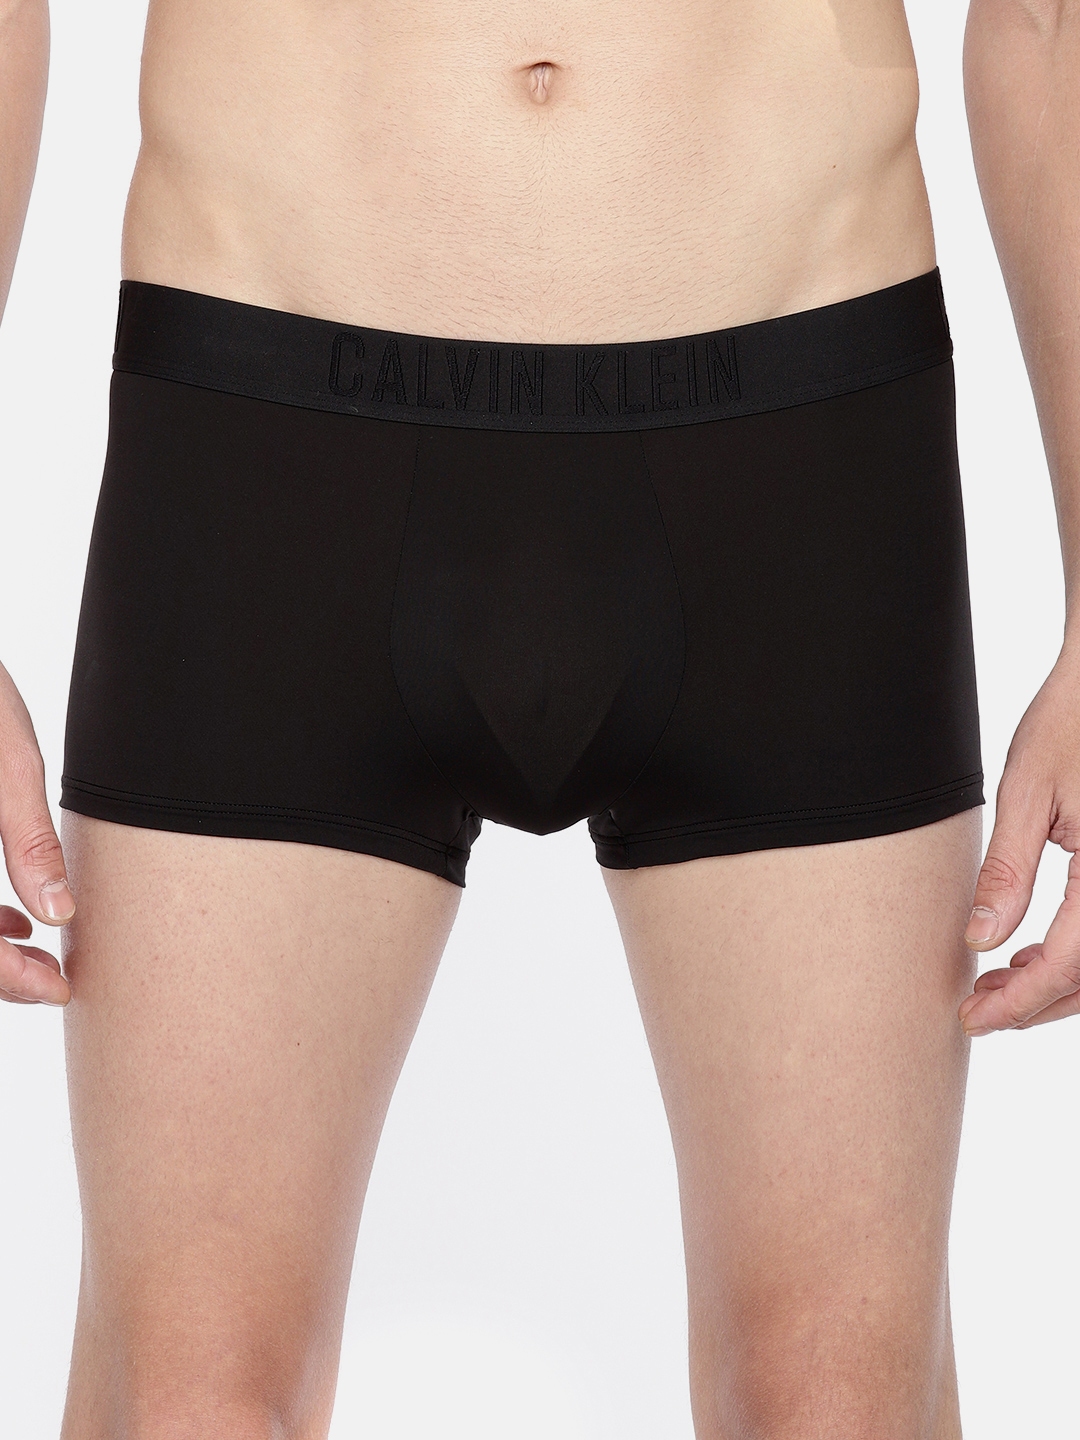 Buy United Colors Of Benetton Solid Colour Low Rise Trunks Black (Pack of  3) online